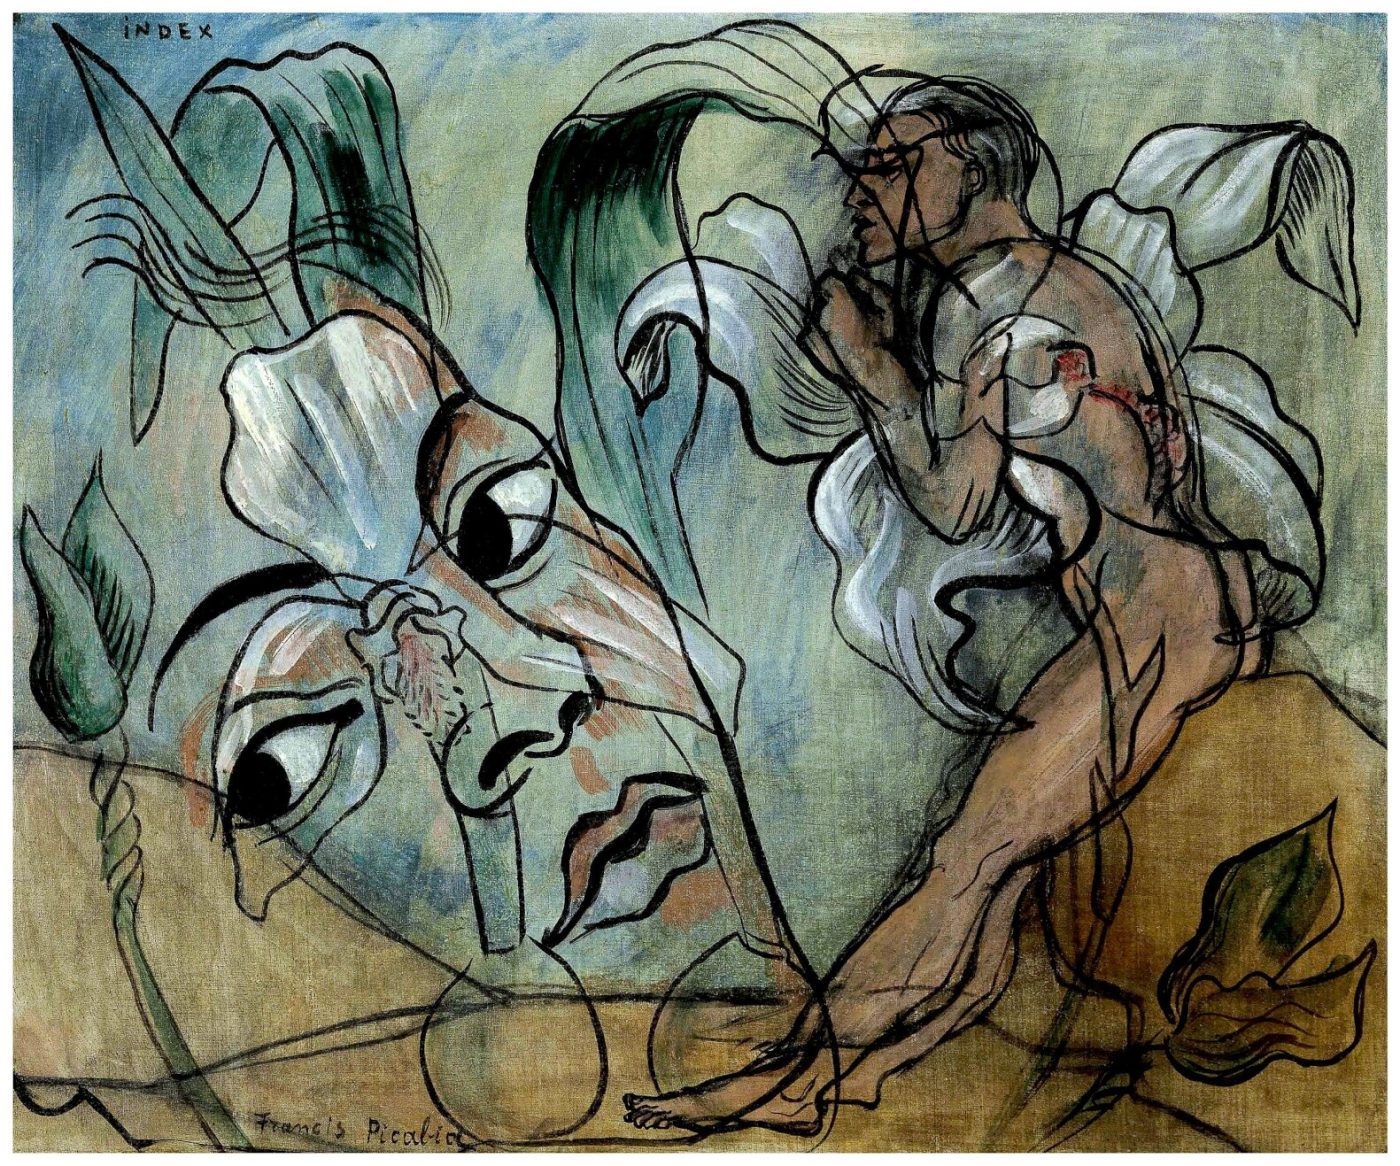 Francis Picabia